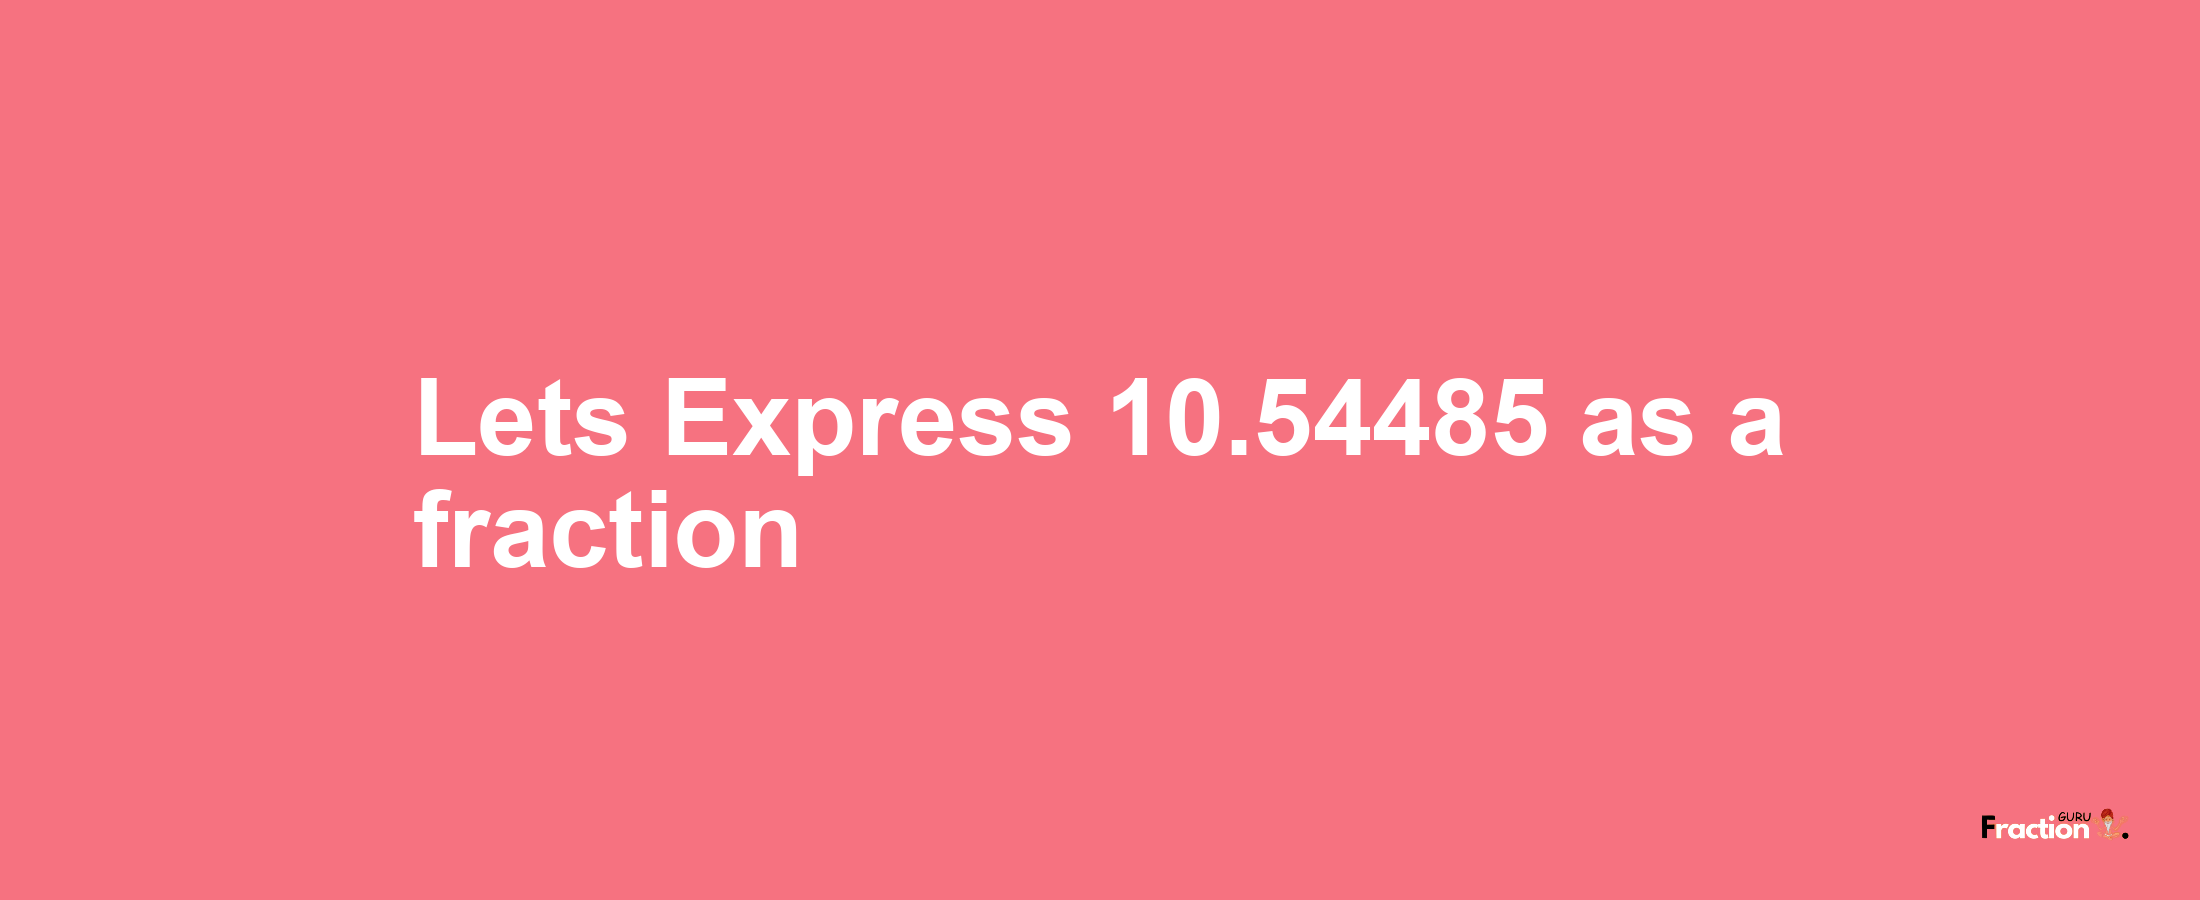 Lets Express 10.54485 as afraction